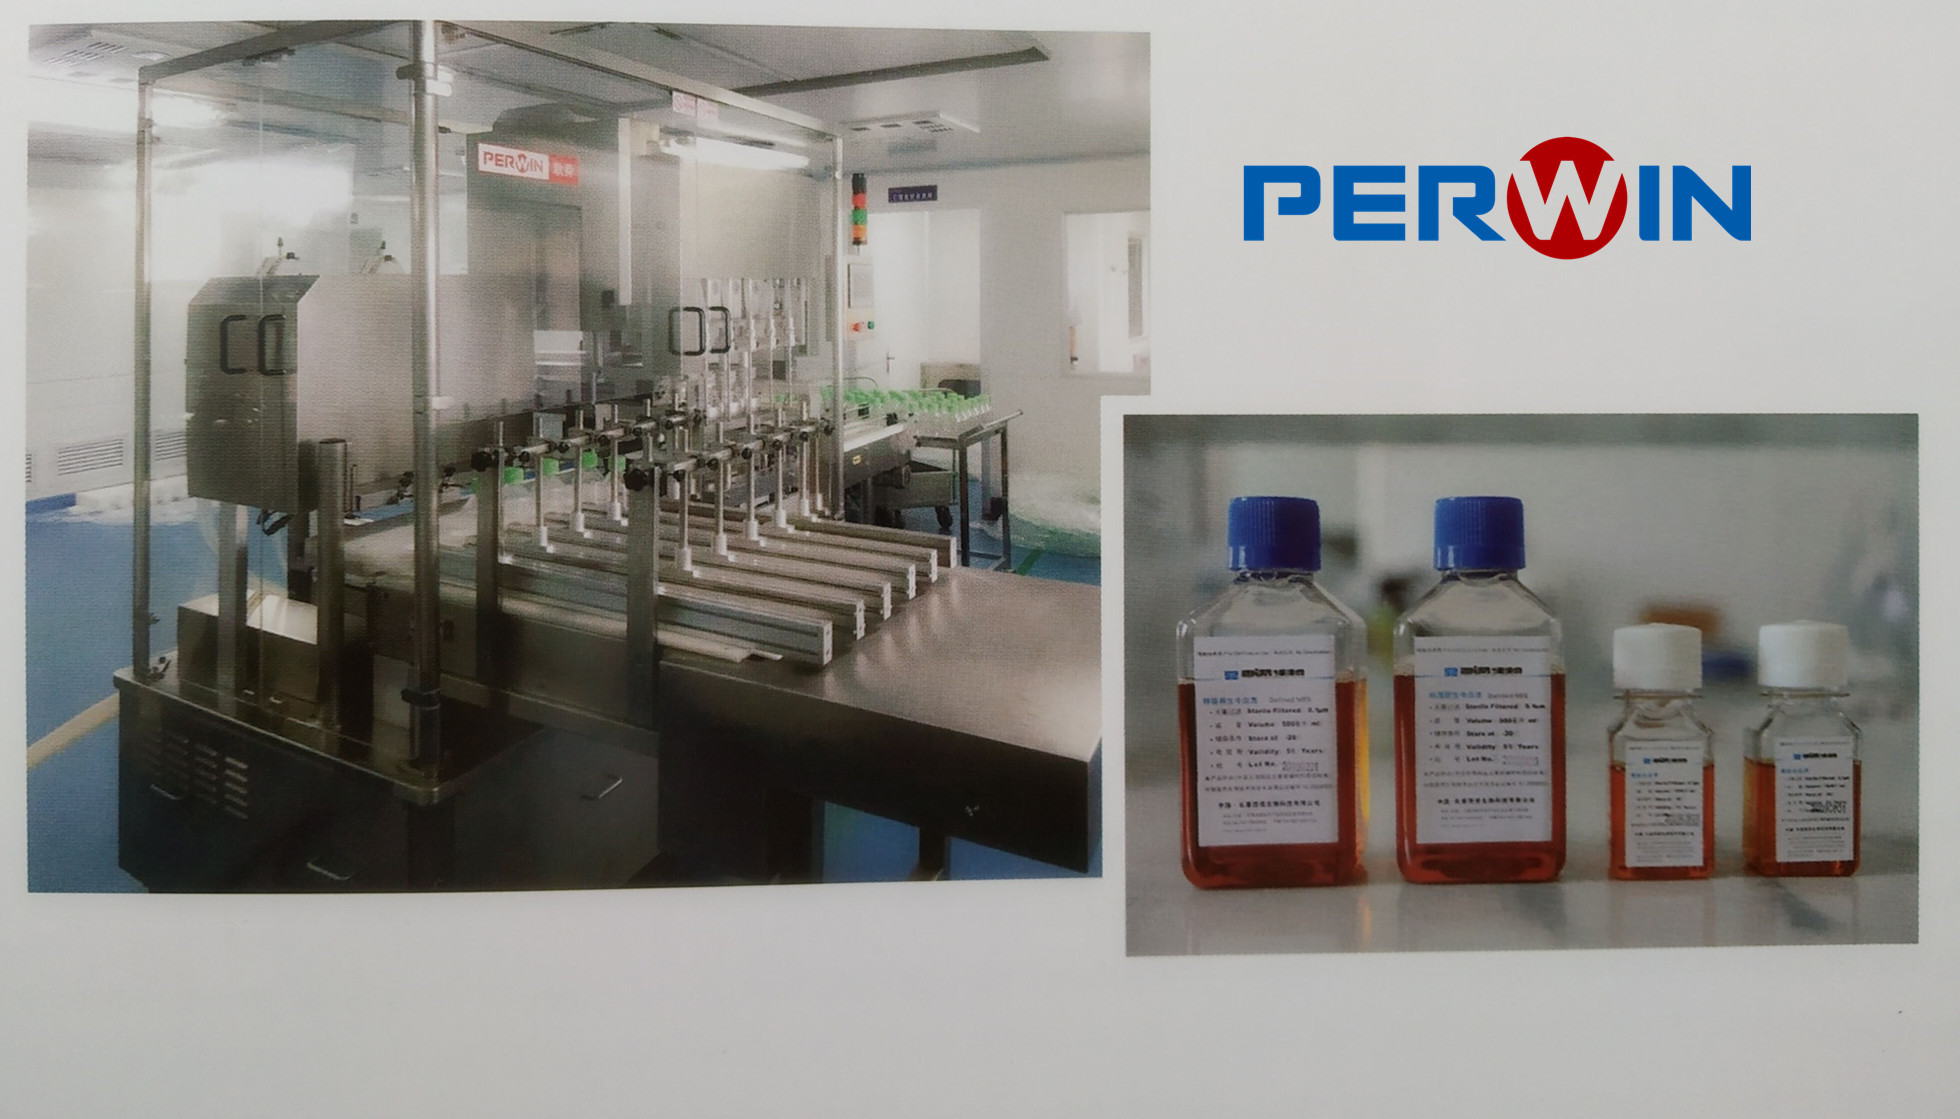 Quality Unscrewing And Filling Capping Machine Square Bottles Tubes Of Sterile Production for sale